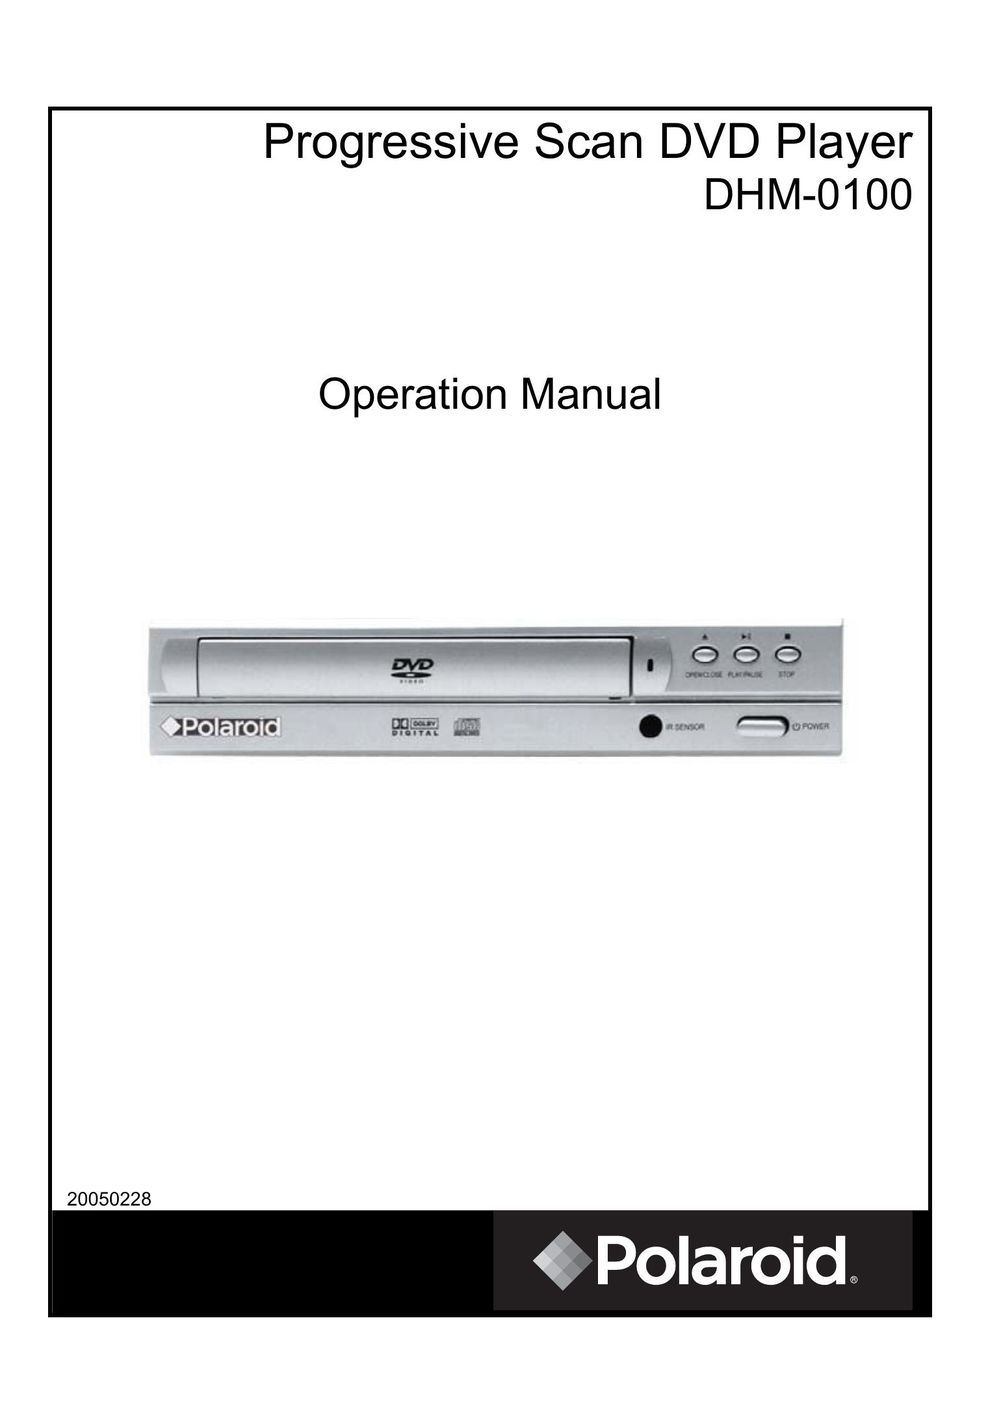 Preference Audio DHM-0100 DVD Player User Manual